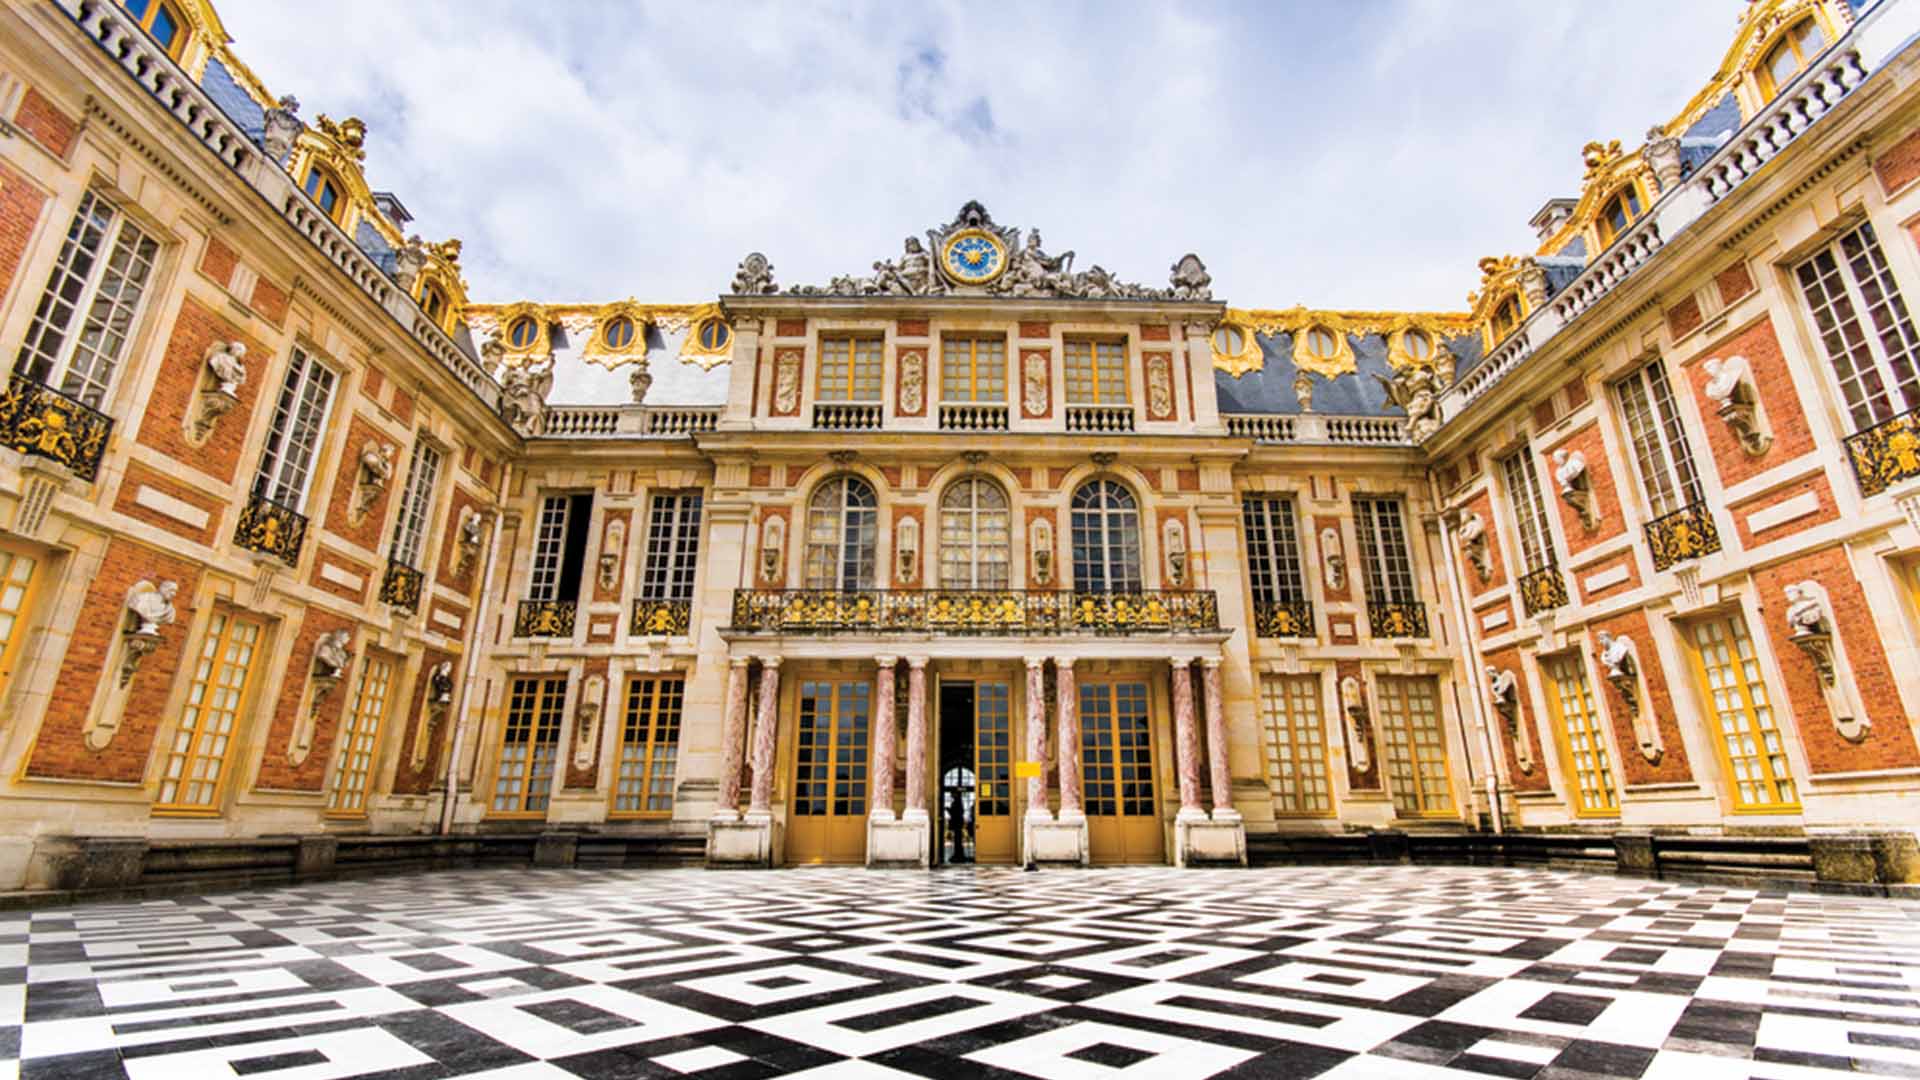 Palace of Versailles France Baroque Art Architecture